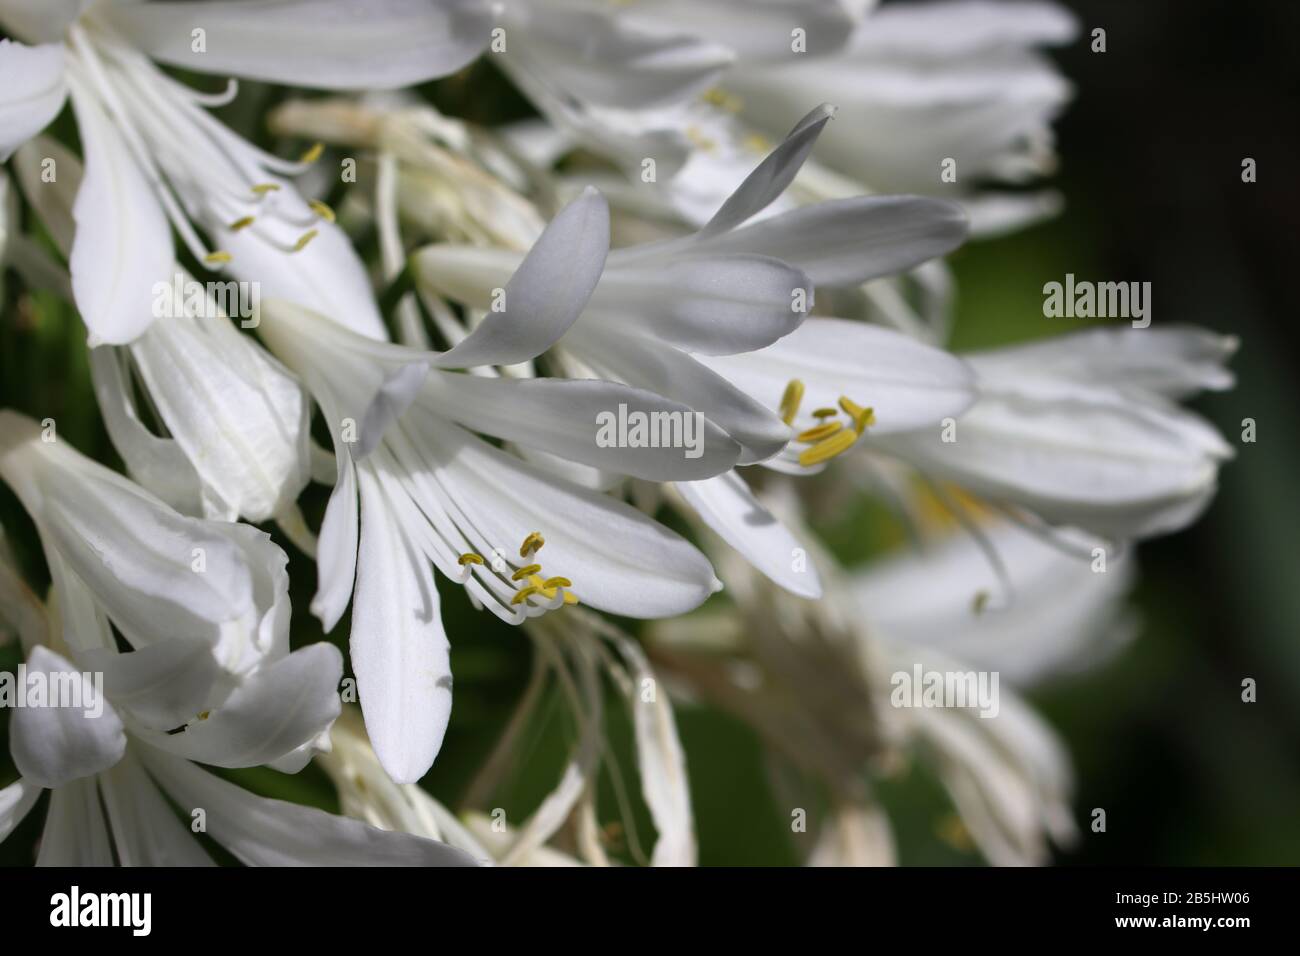 Agapanthus africanus:Lovely clusters of bell-like white flowers on tall, upright stalks that rise above clumping, narrow, strap-like, green leaves. Stock Photo